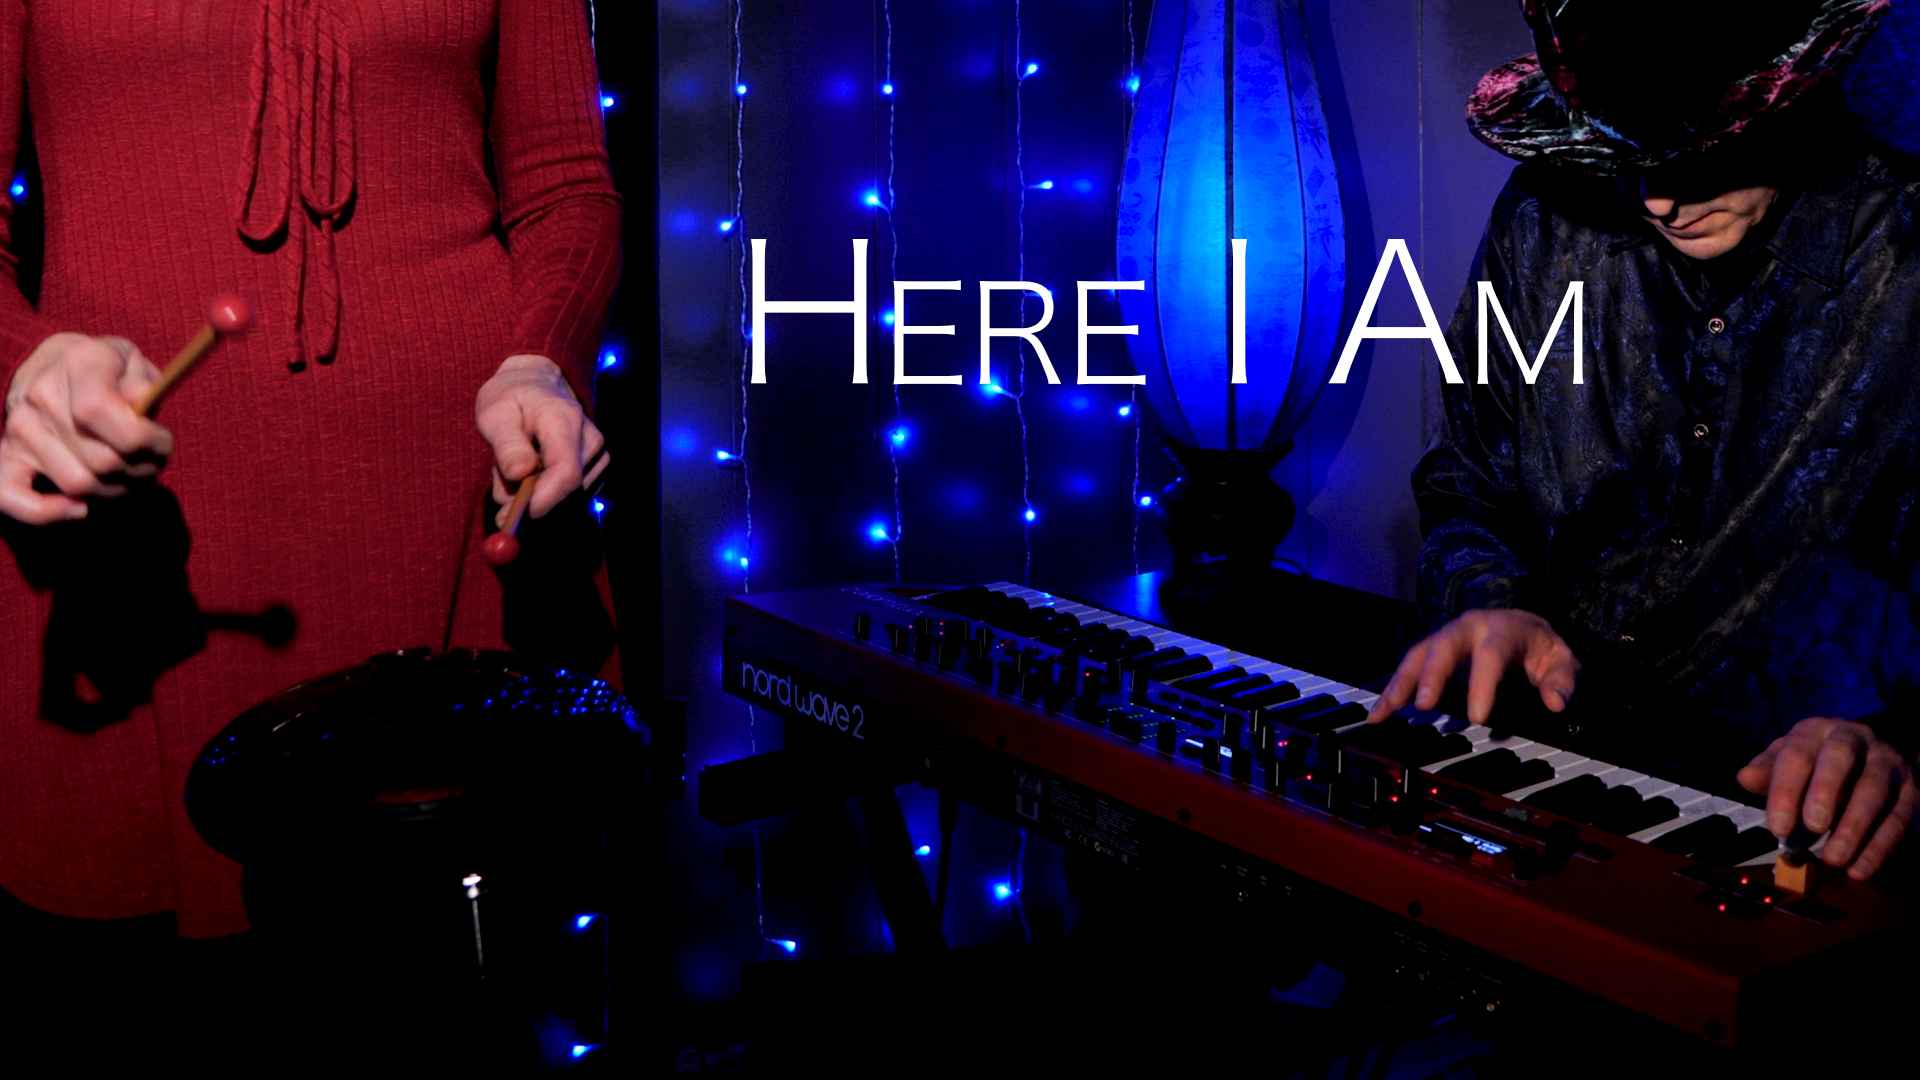 Video - 'Here I Am